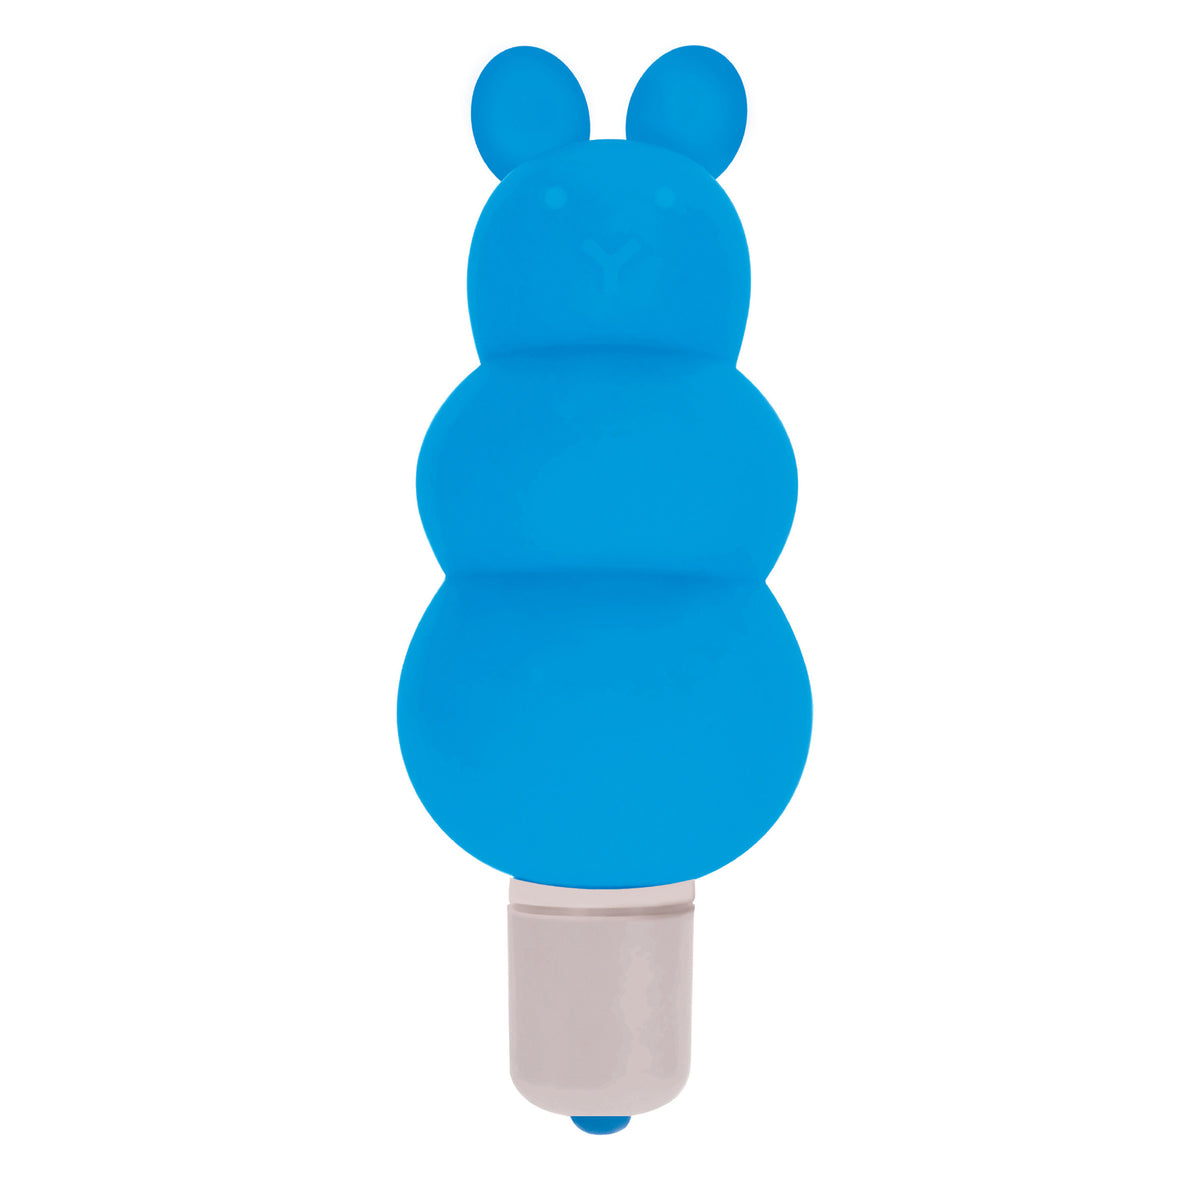 Excite Silicone Ripple Bullet Vibe - Blue